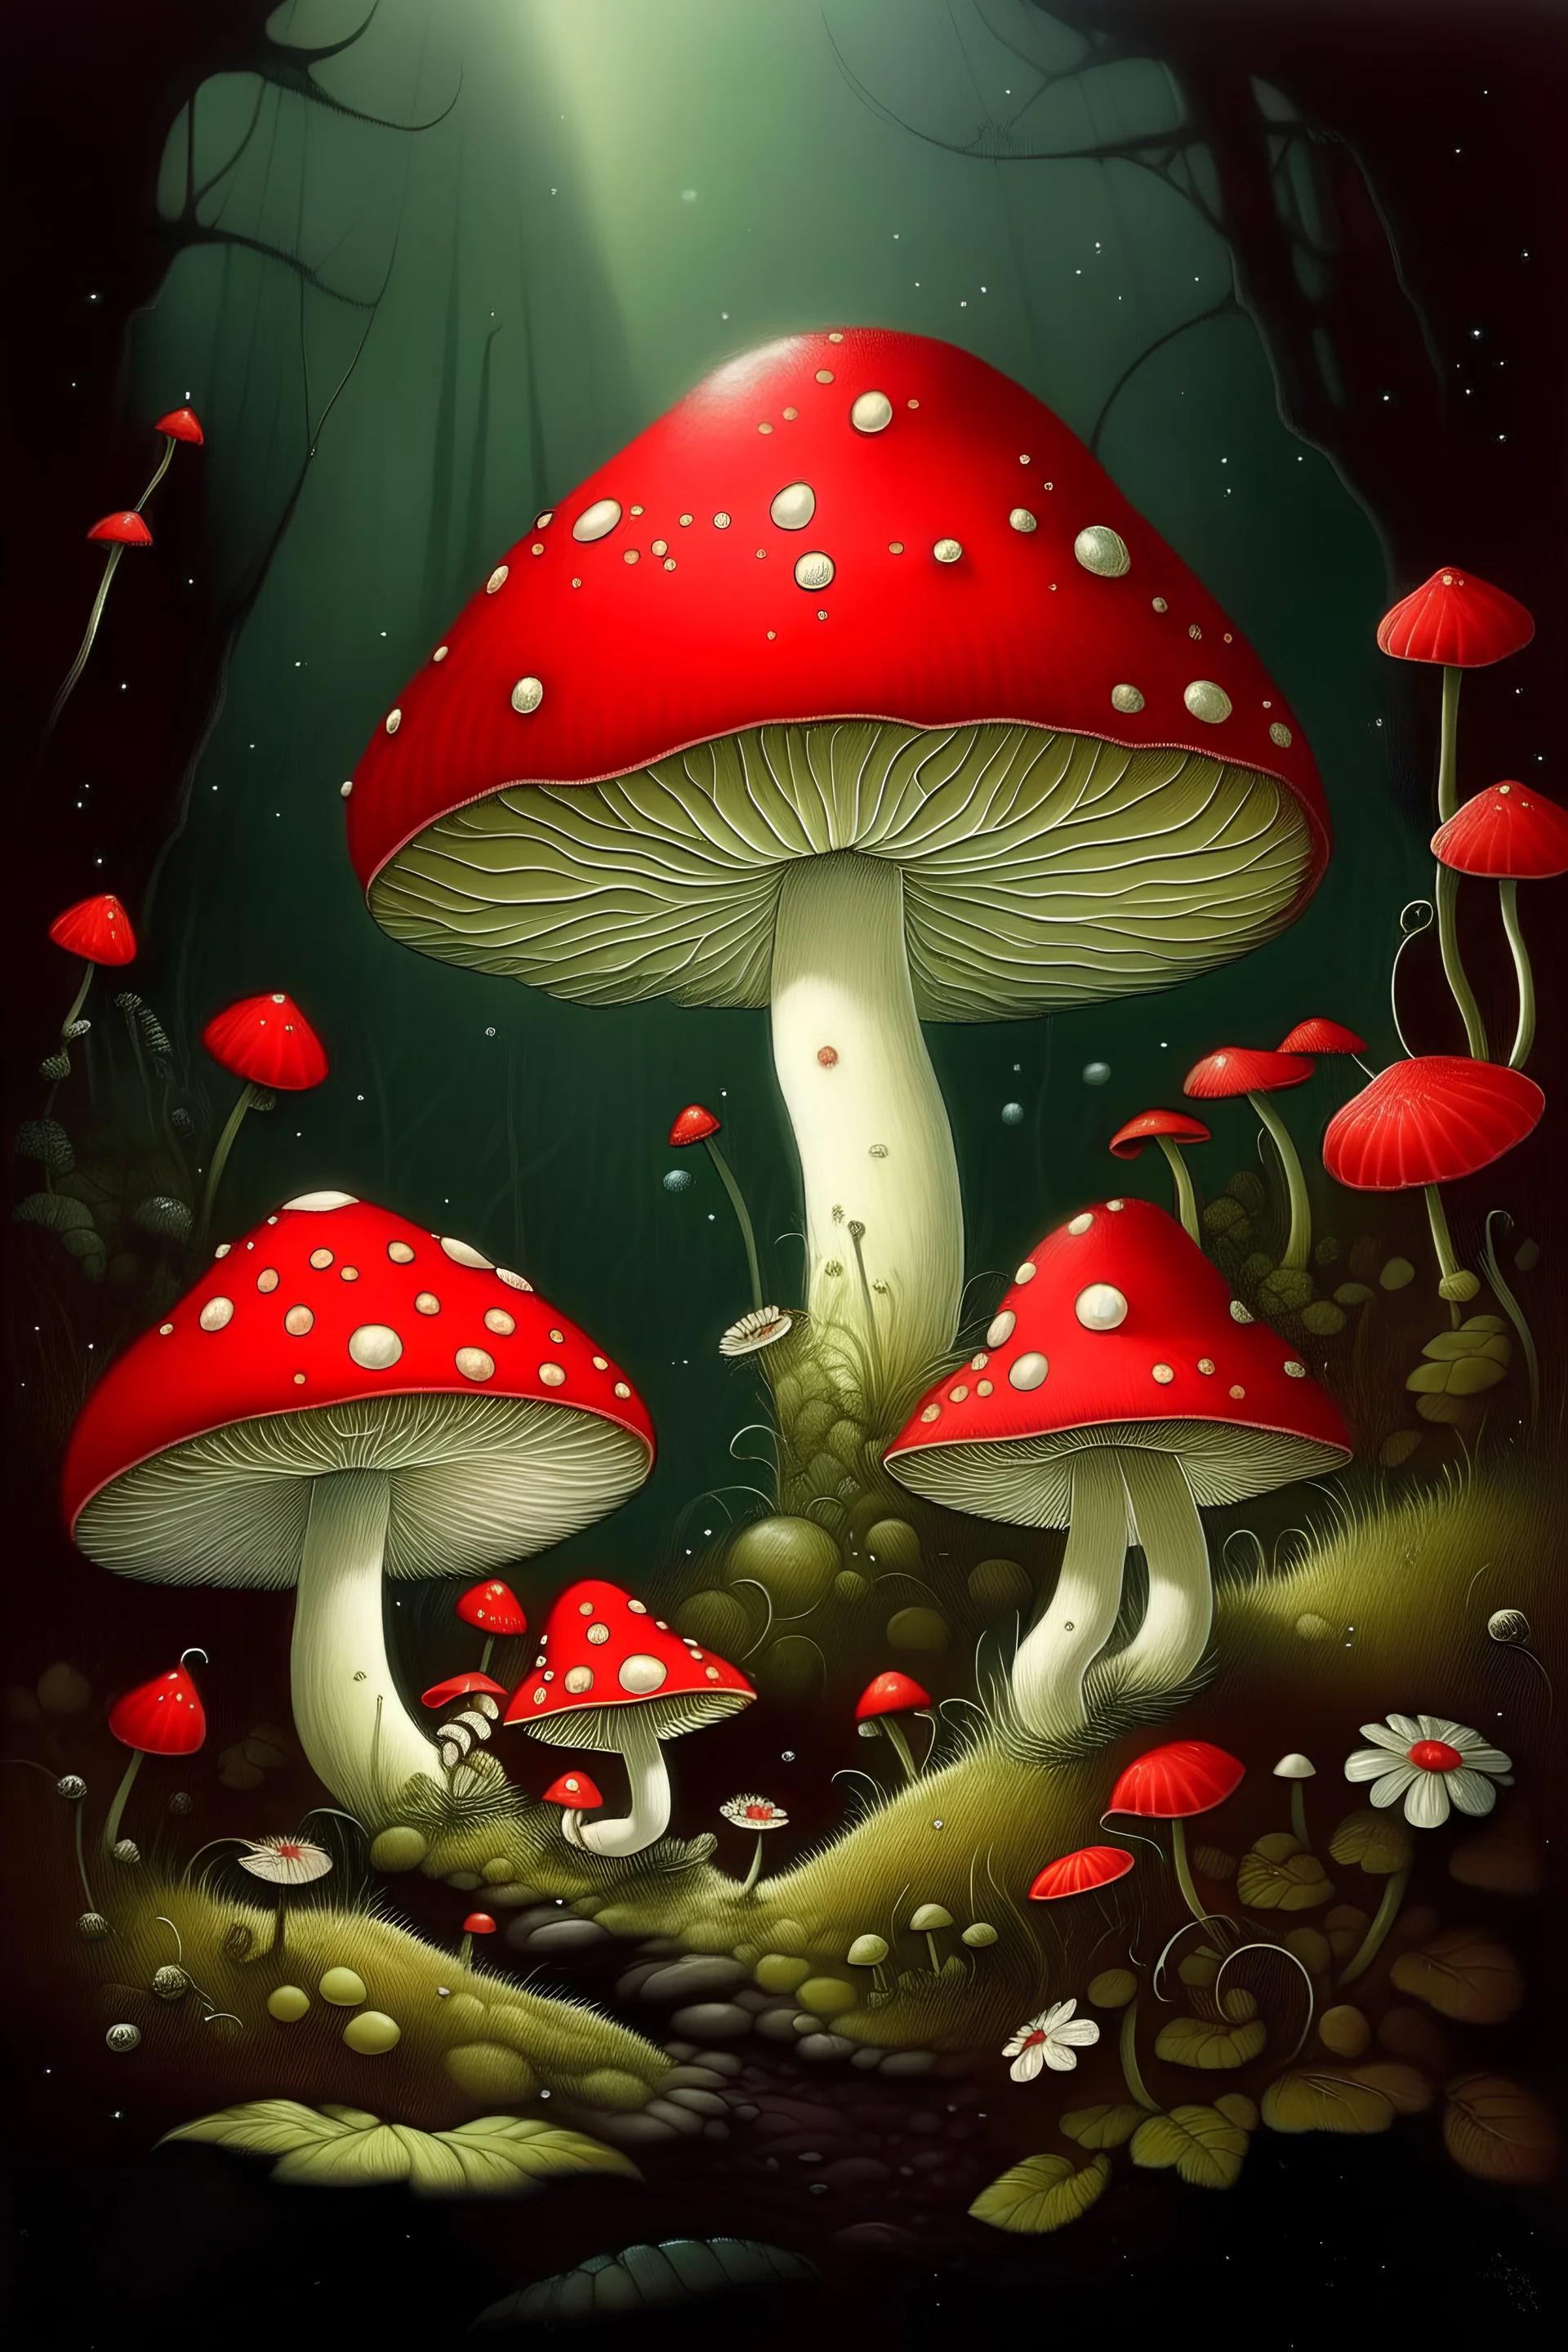 Mischievous gremlin, amanita muscaria mushroom inspired aesthetic, rich hues of red and white, hallucinatory and whimsical detailing, soft dream-like lighting, captured in mid-action, by Mary Blair and Theodor Kittelsen